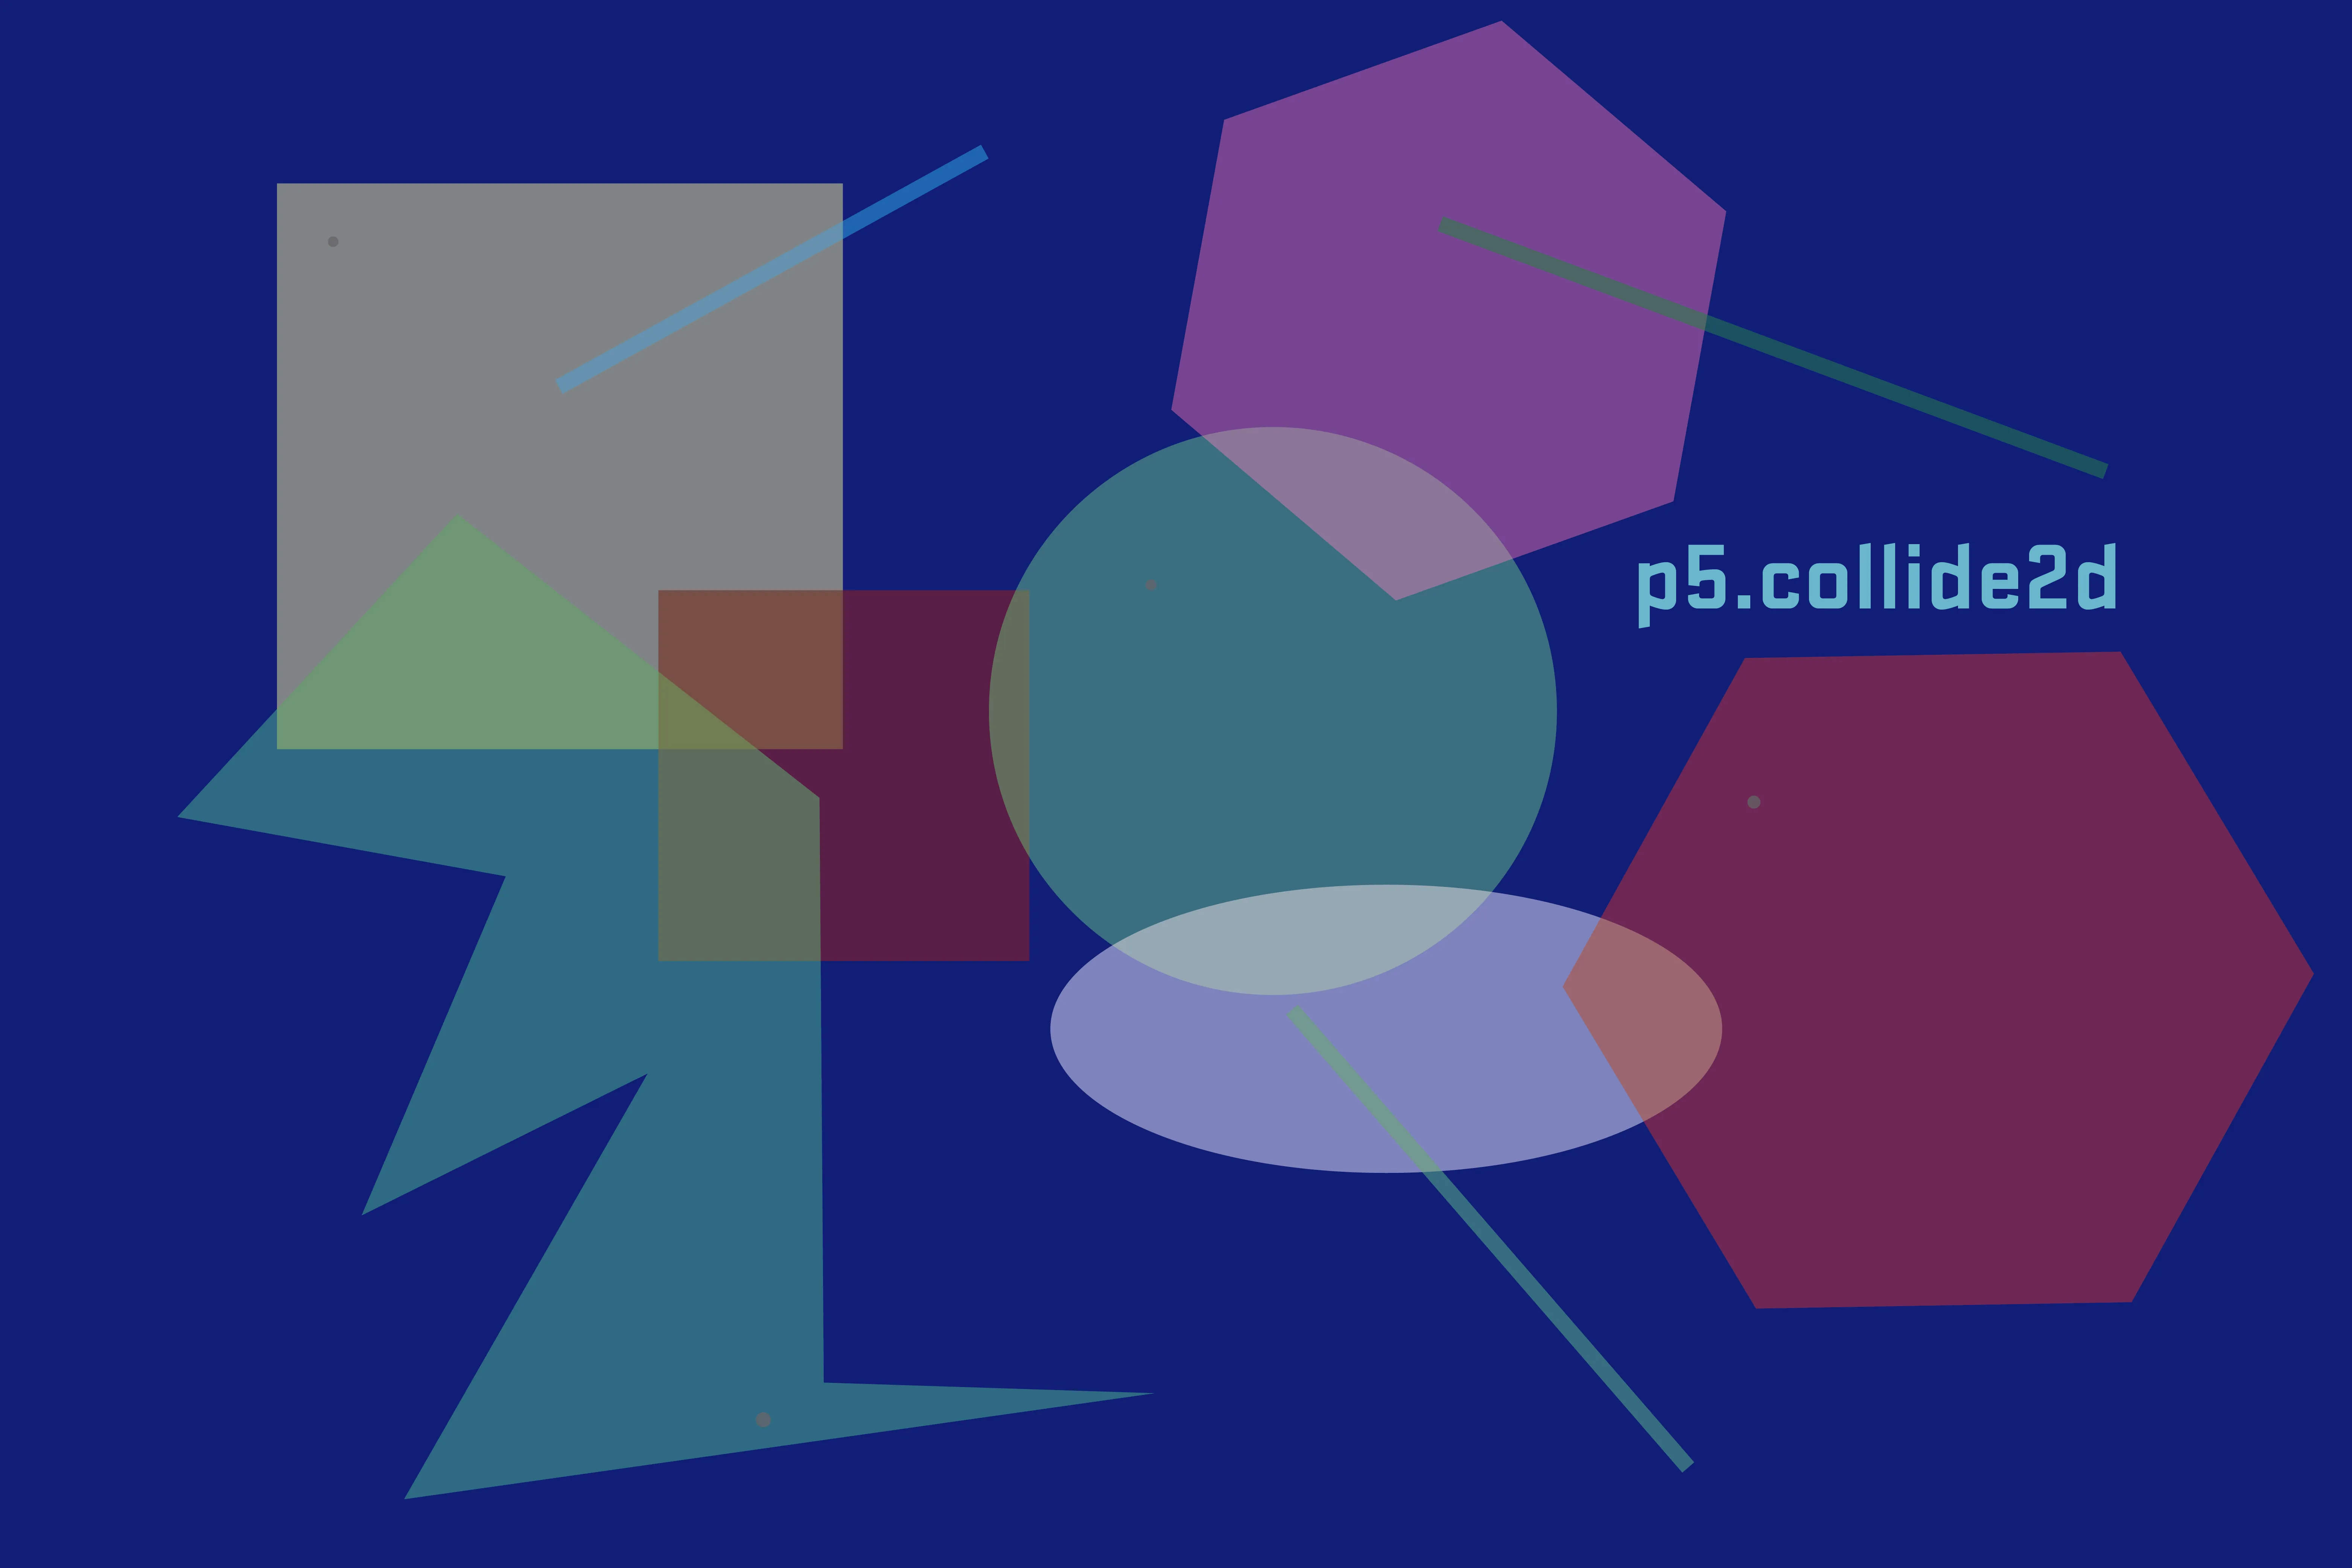 Various colored shaped overlapping and colliding representing the functions of the p5.collide2d library